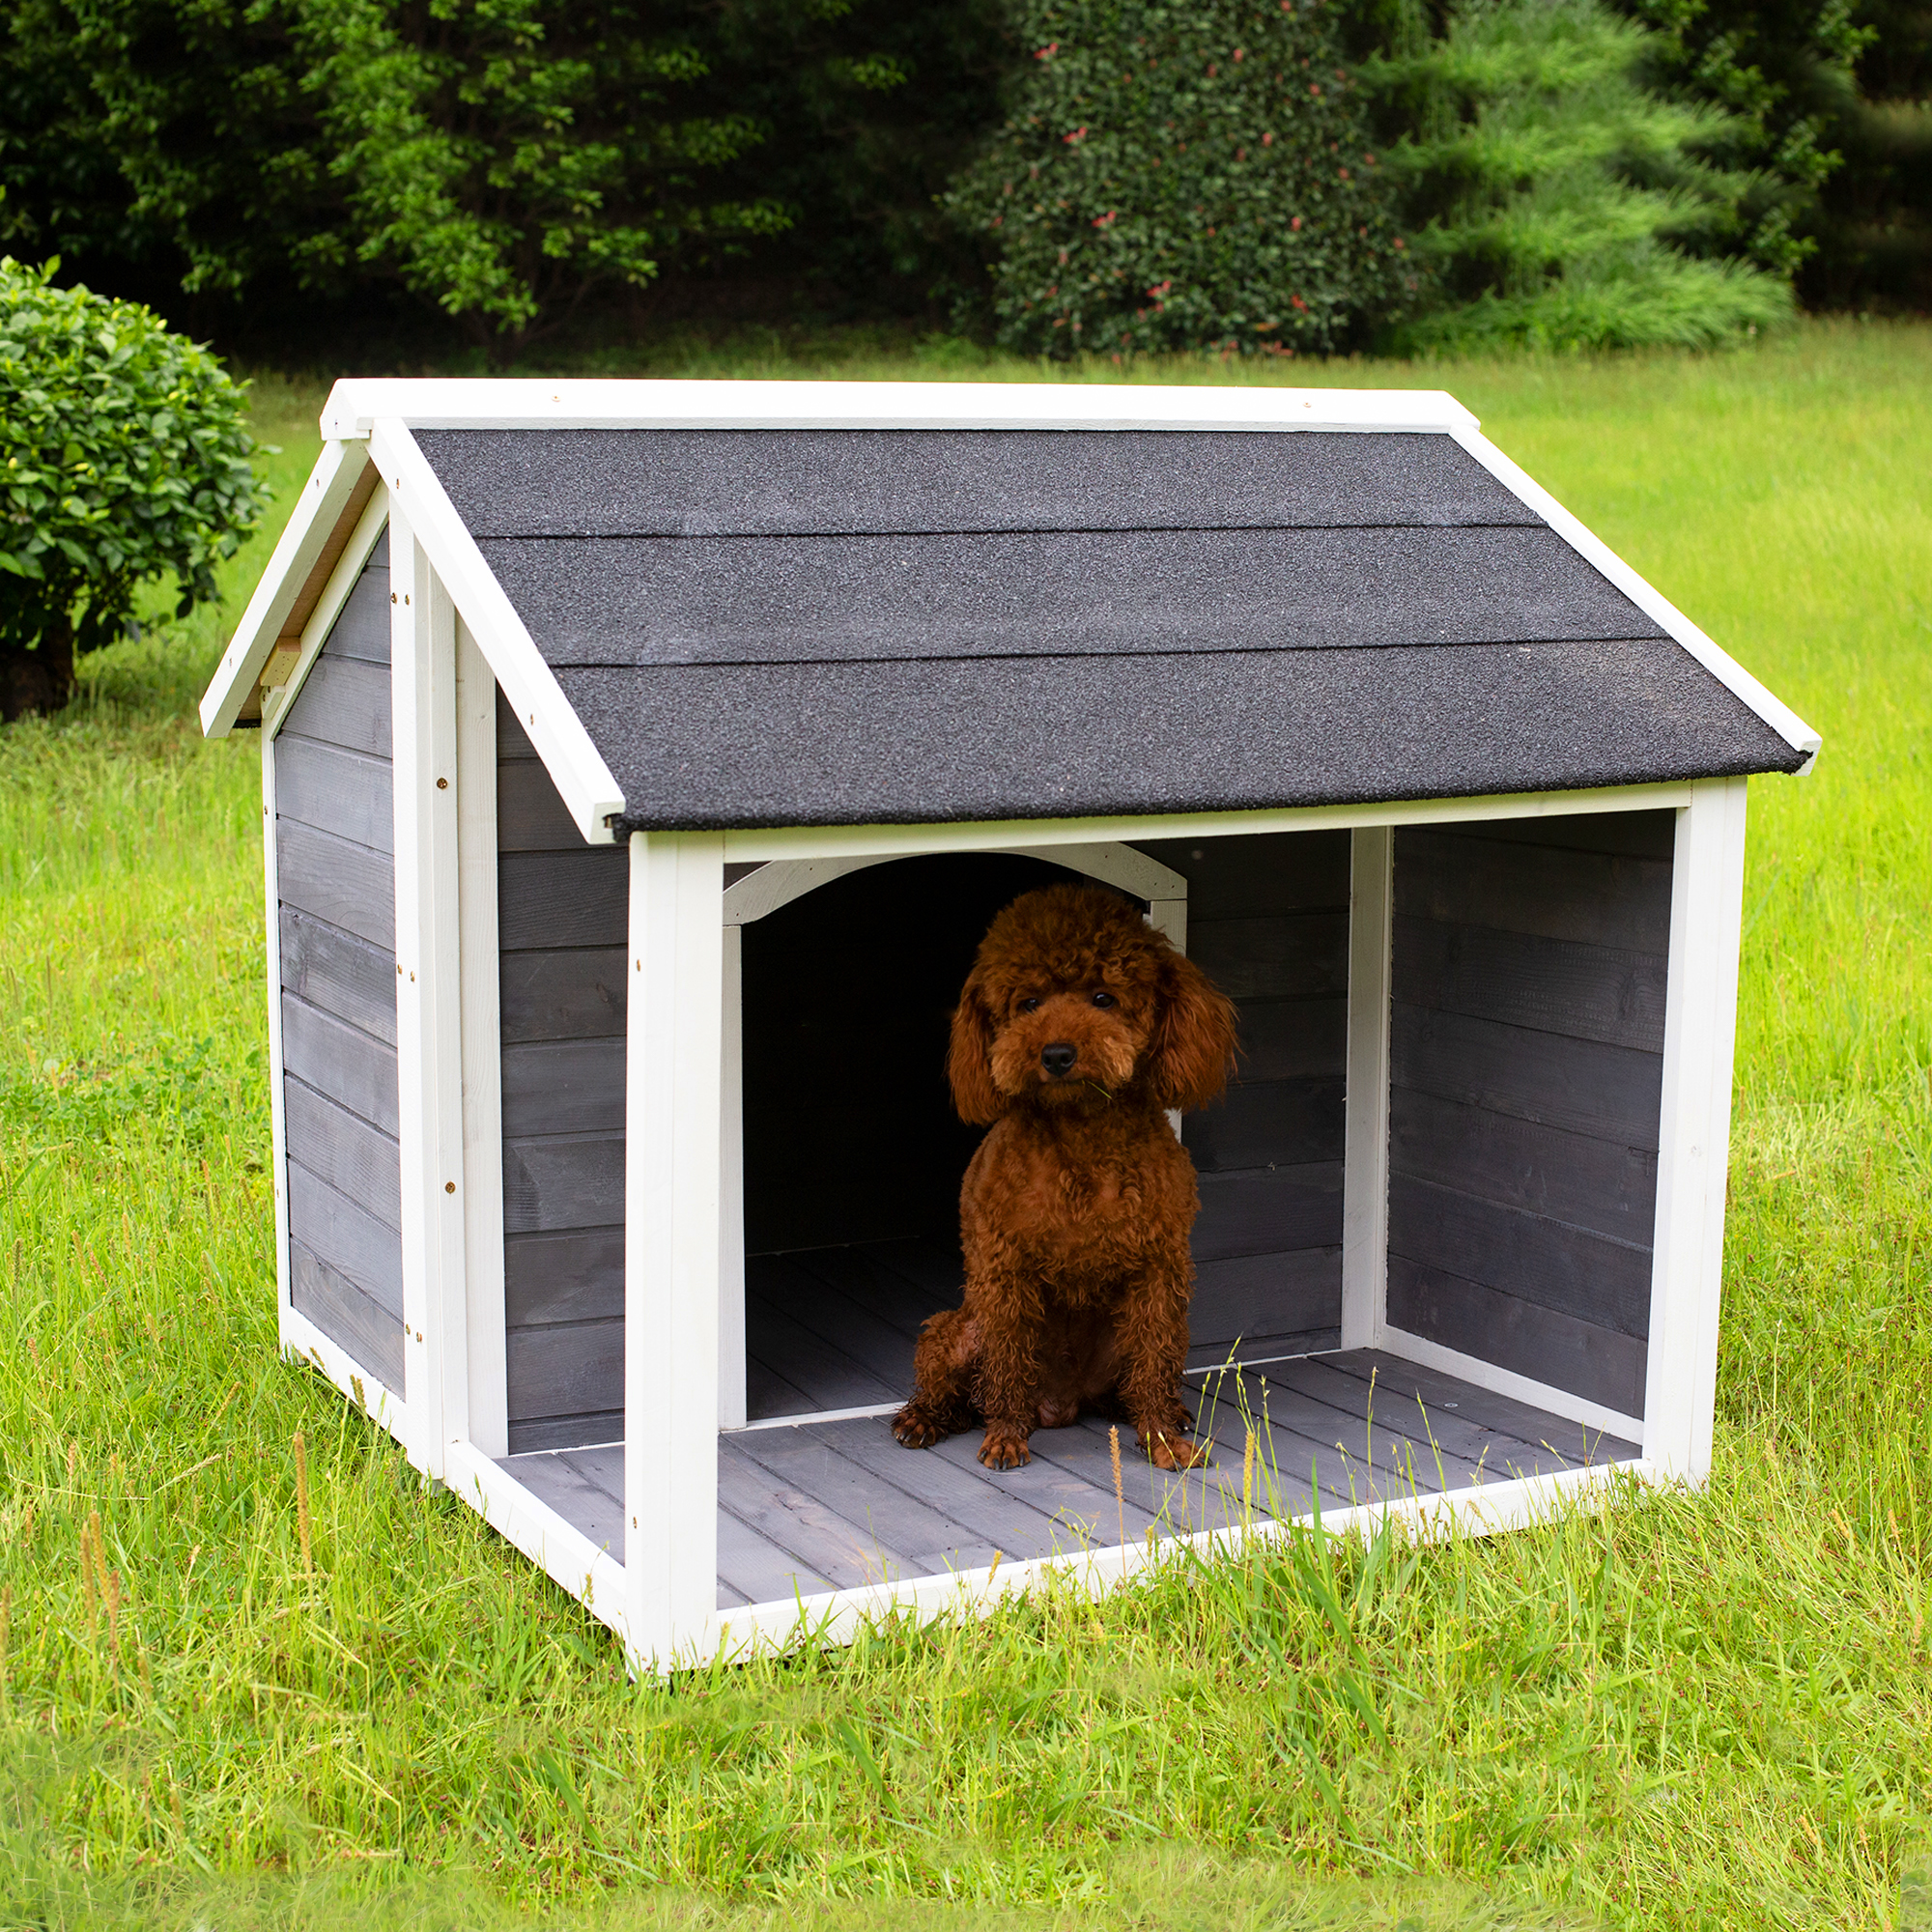 Large Outdoor Wooden Dog House, Waterproof Dog Cage, Windproof and Warm Dog Kennel with Porch Deck-Boyel Living